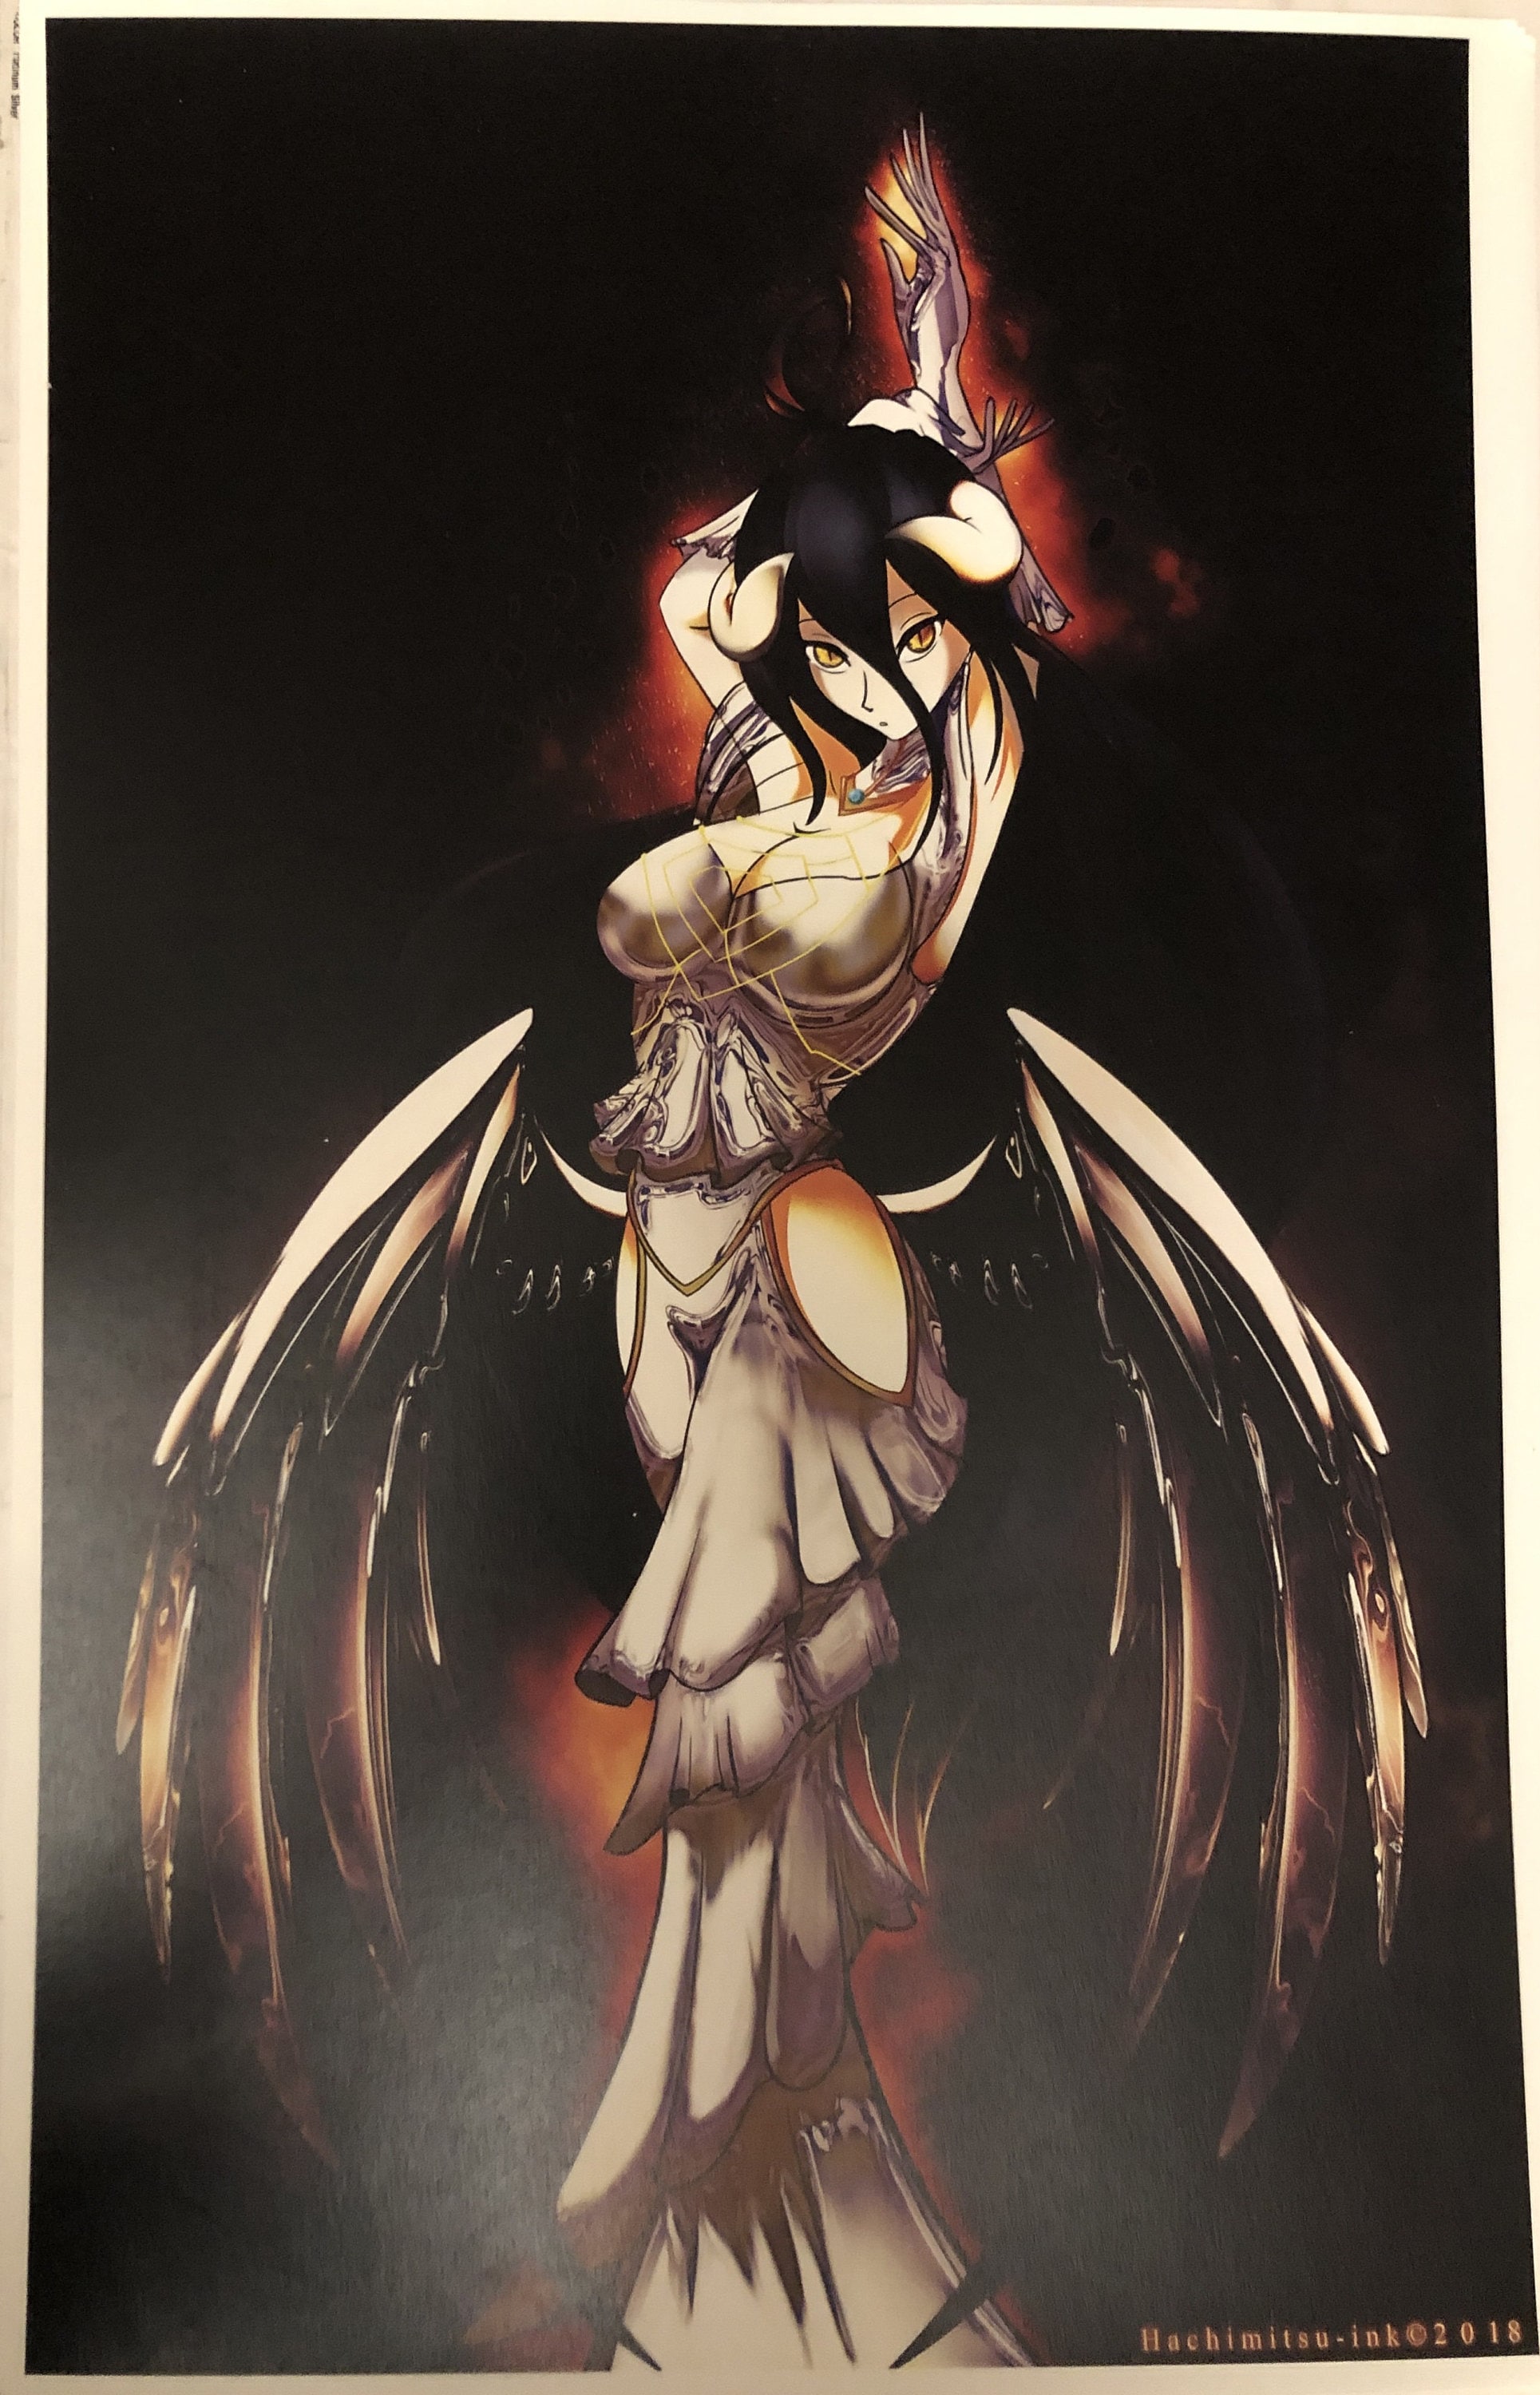  Anime Overlord Albedo Ainz Ooal Canvas Poster Wall Art Decor  Print Picture Paintings for Living Room Bedroom Decoration Unframe:  24x36inch(60x90cm): Posters & Prints